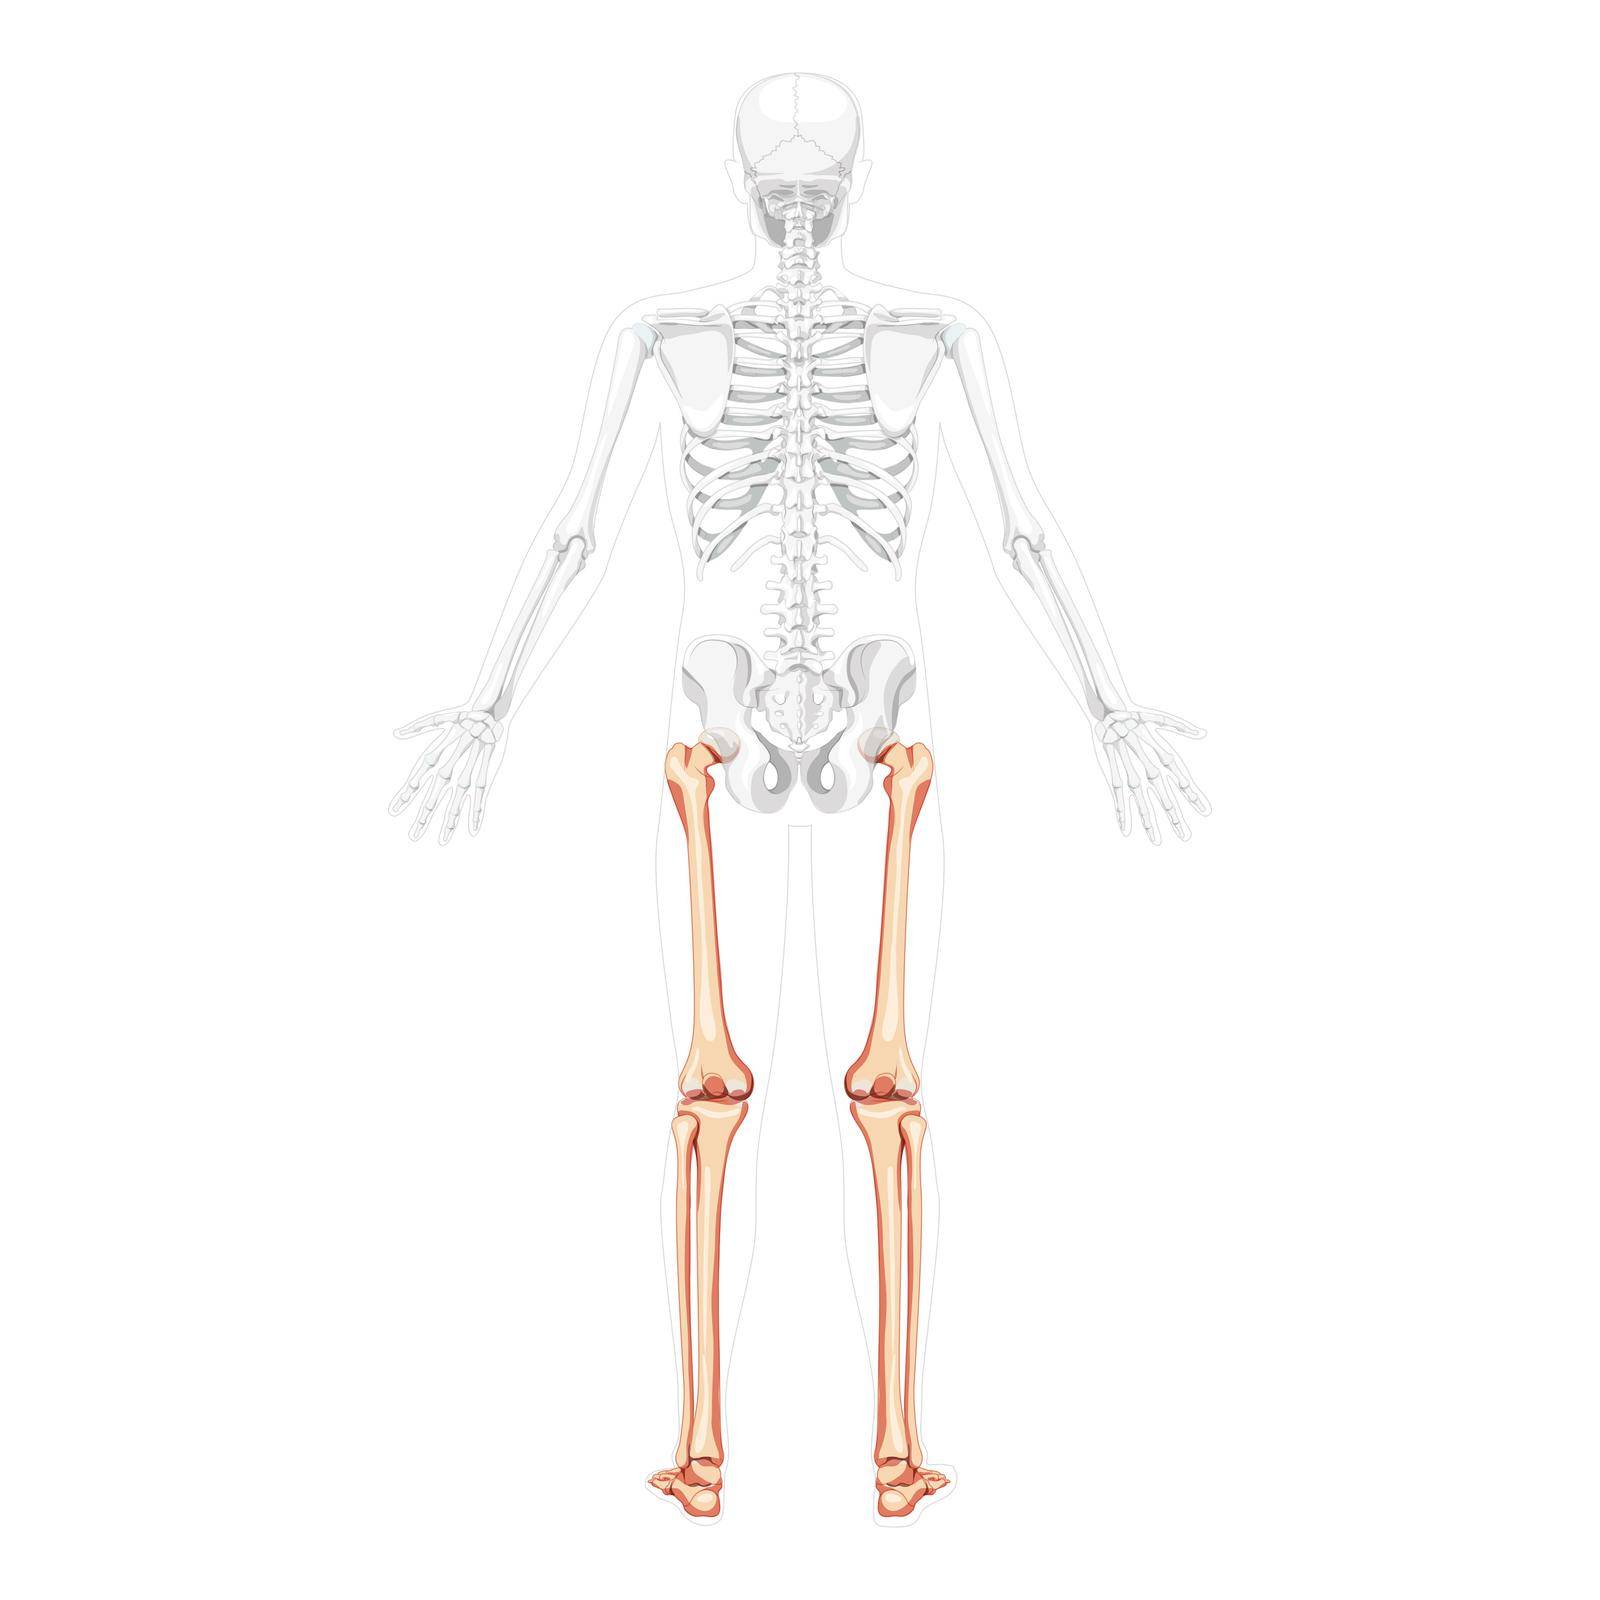 Skeleton Thighs and legs lower limb Human back view with two arm poses with partly transparent bones position 3D by Vectoressa